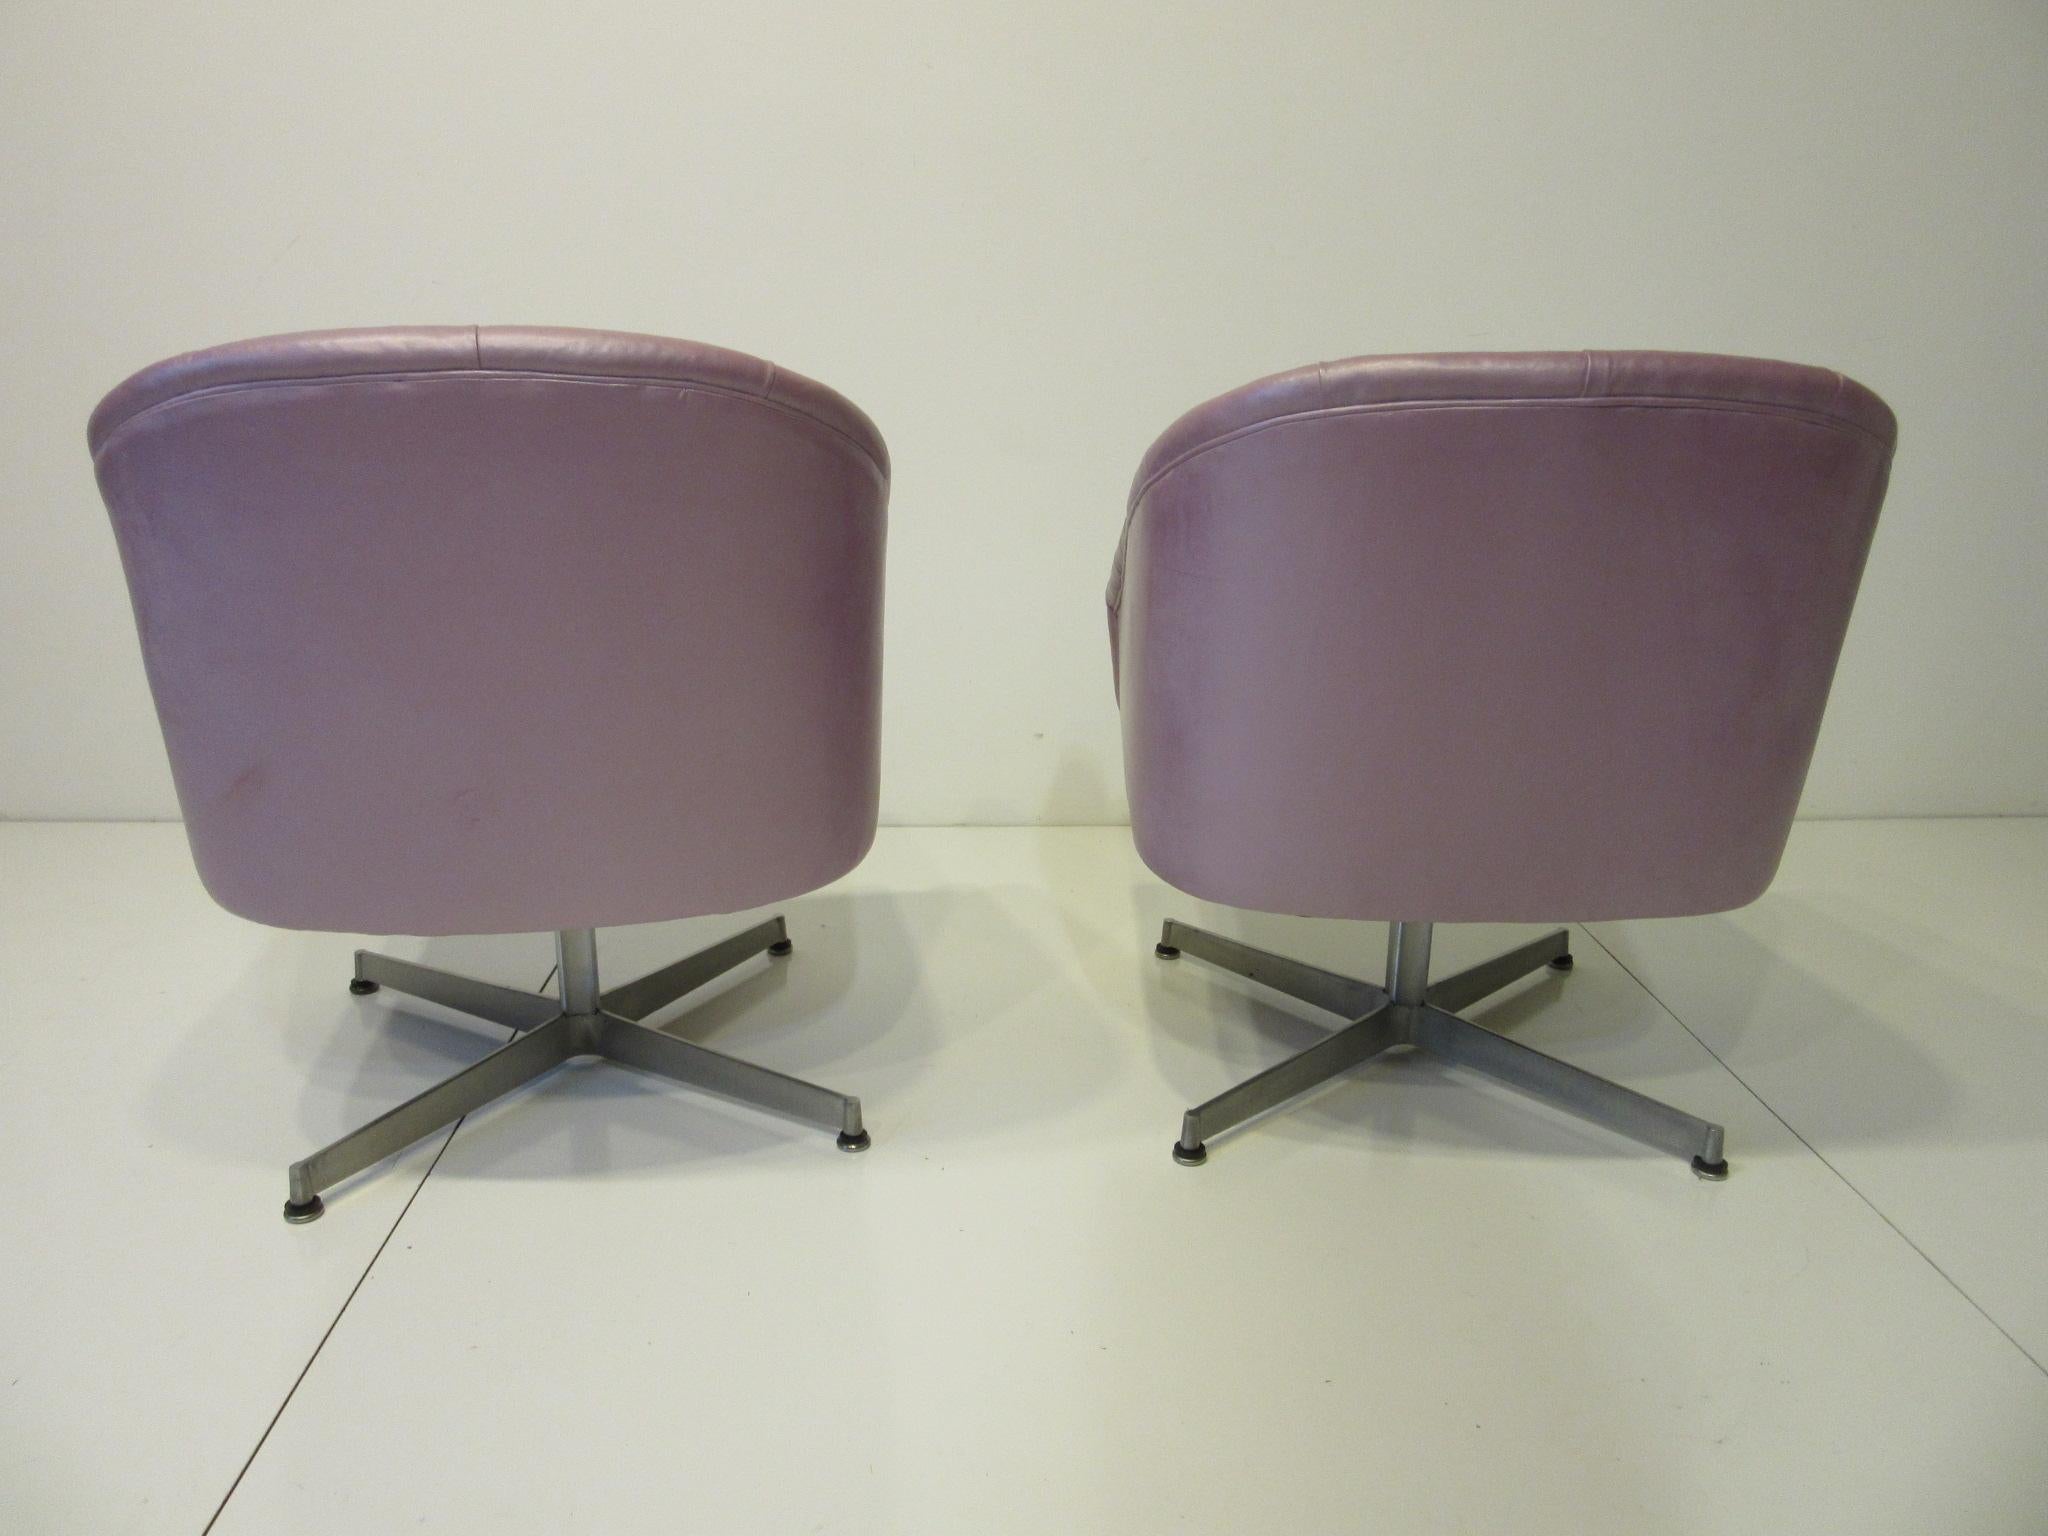 American Midcentury Tufted Leatherette Swivel Chairs by Shelby Williams For Sale